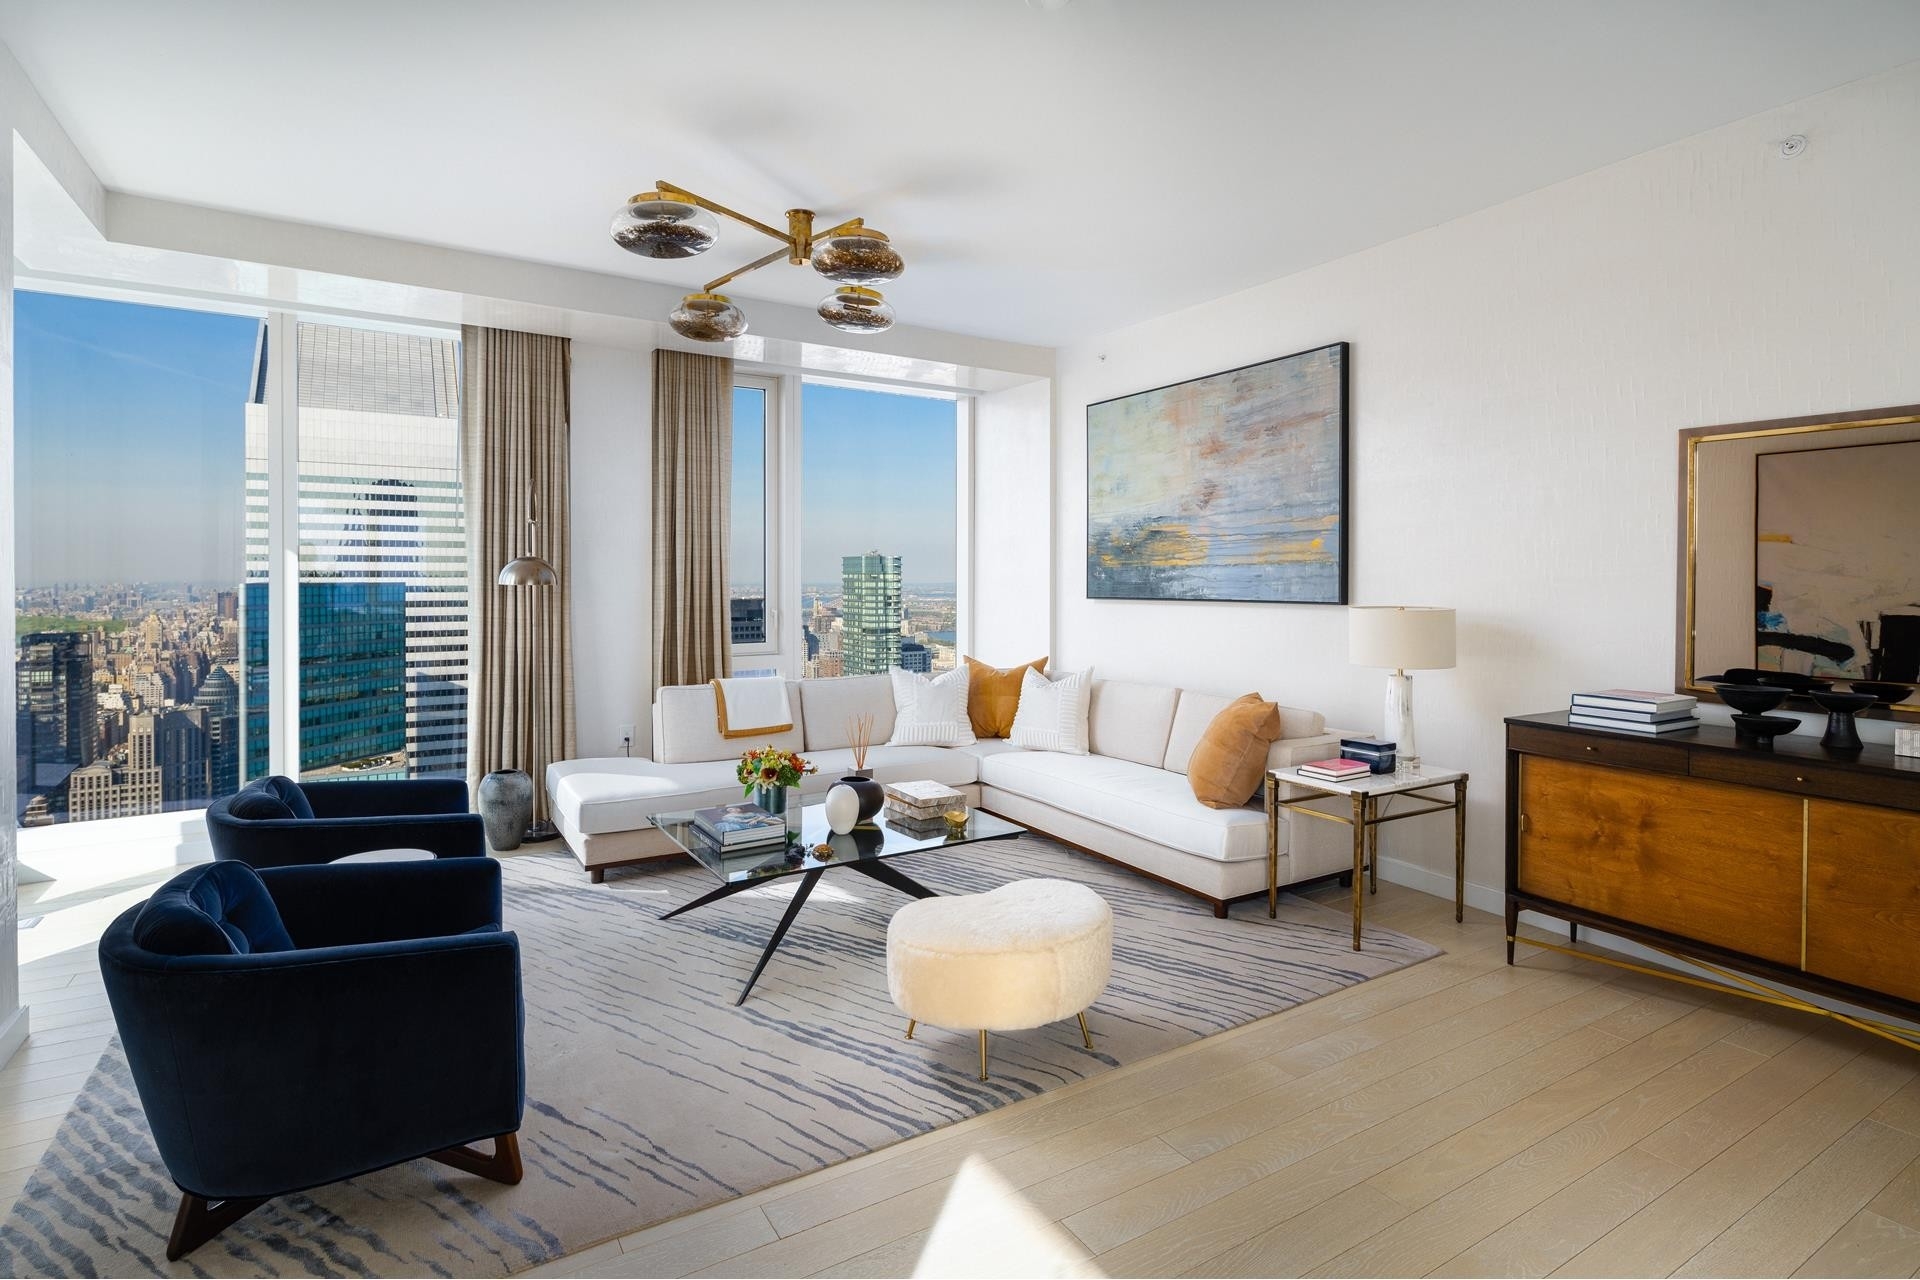 Property at The Centrale, 138 E 50TH ST, 65 Turtle Bay, New York, NY 10022